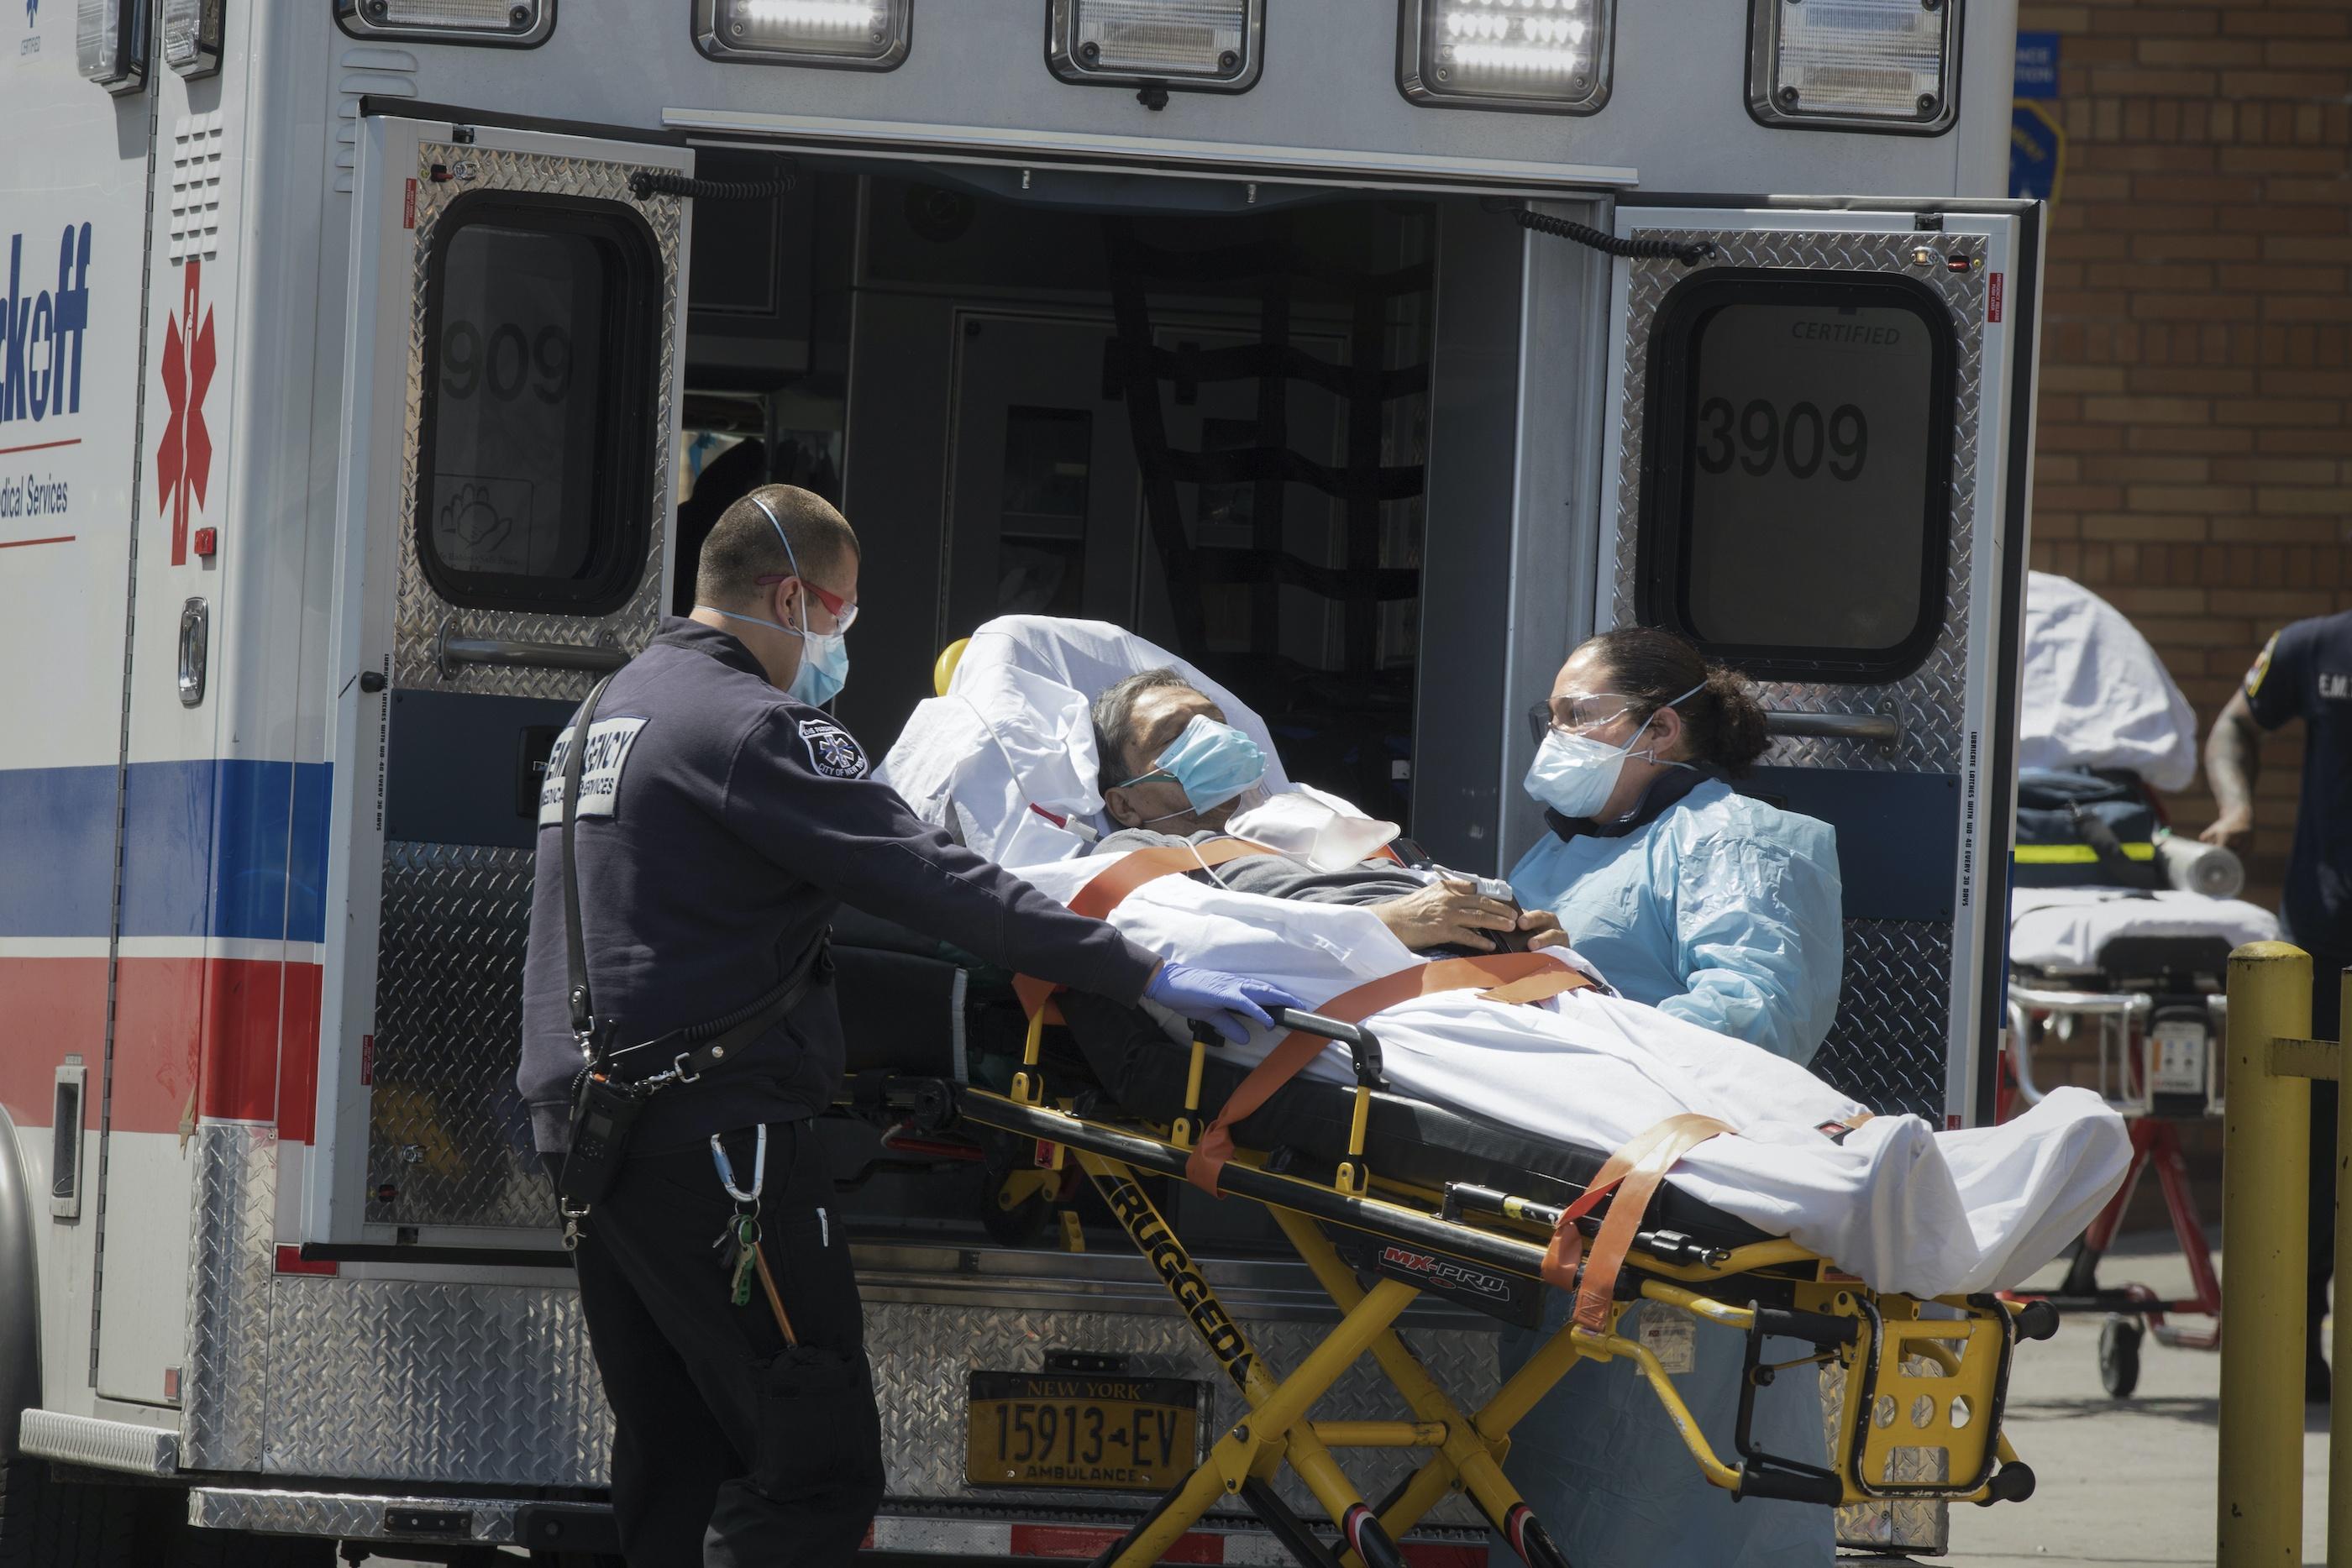 What 2 EMTs are seeing as they respond to NY virus outbreak PBS NewsHour